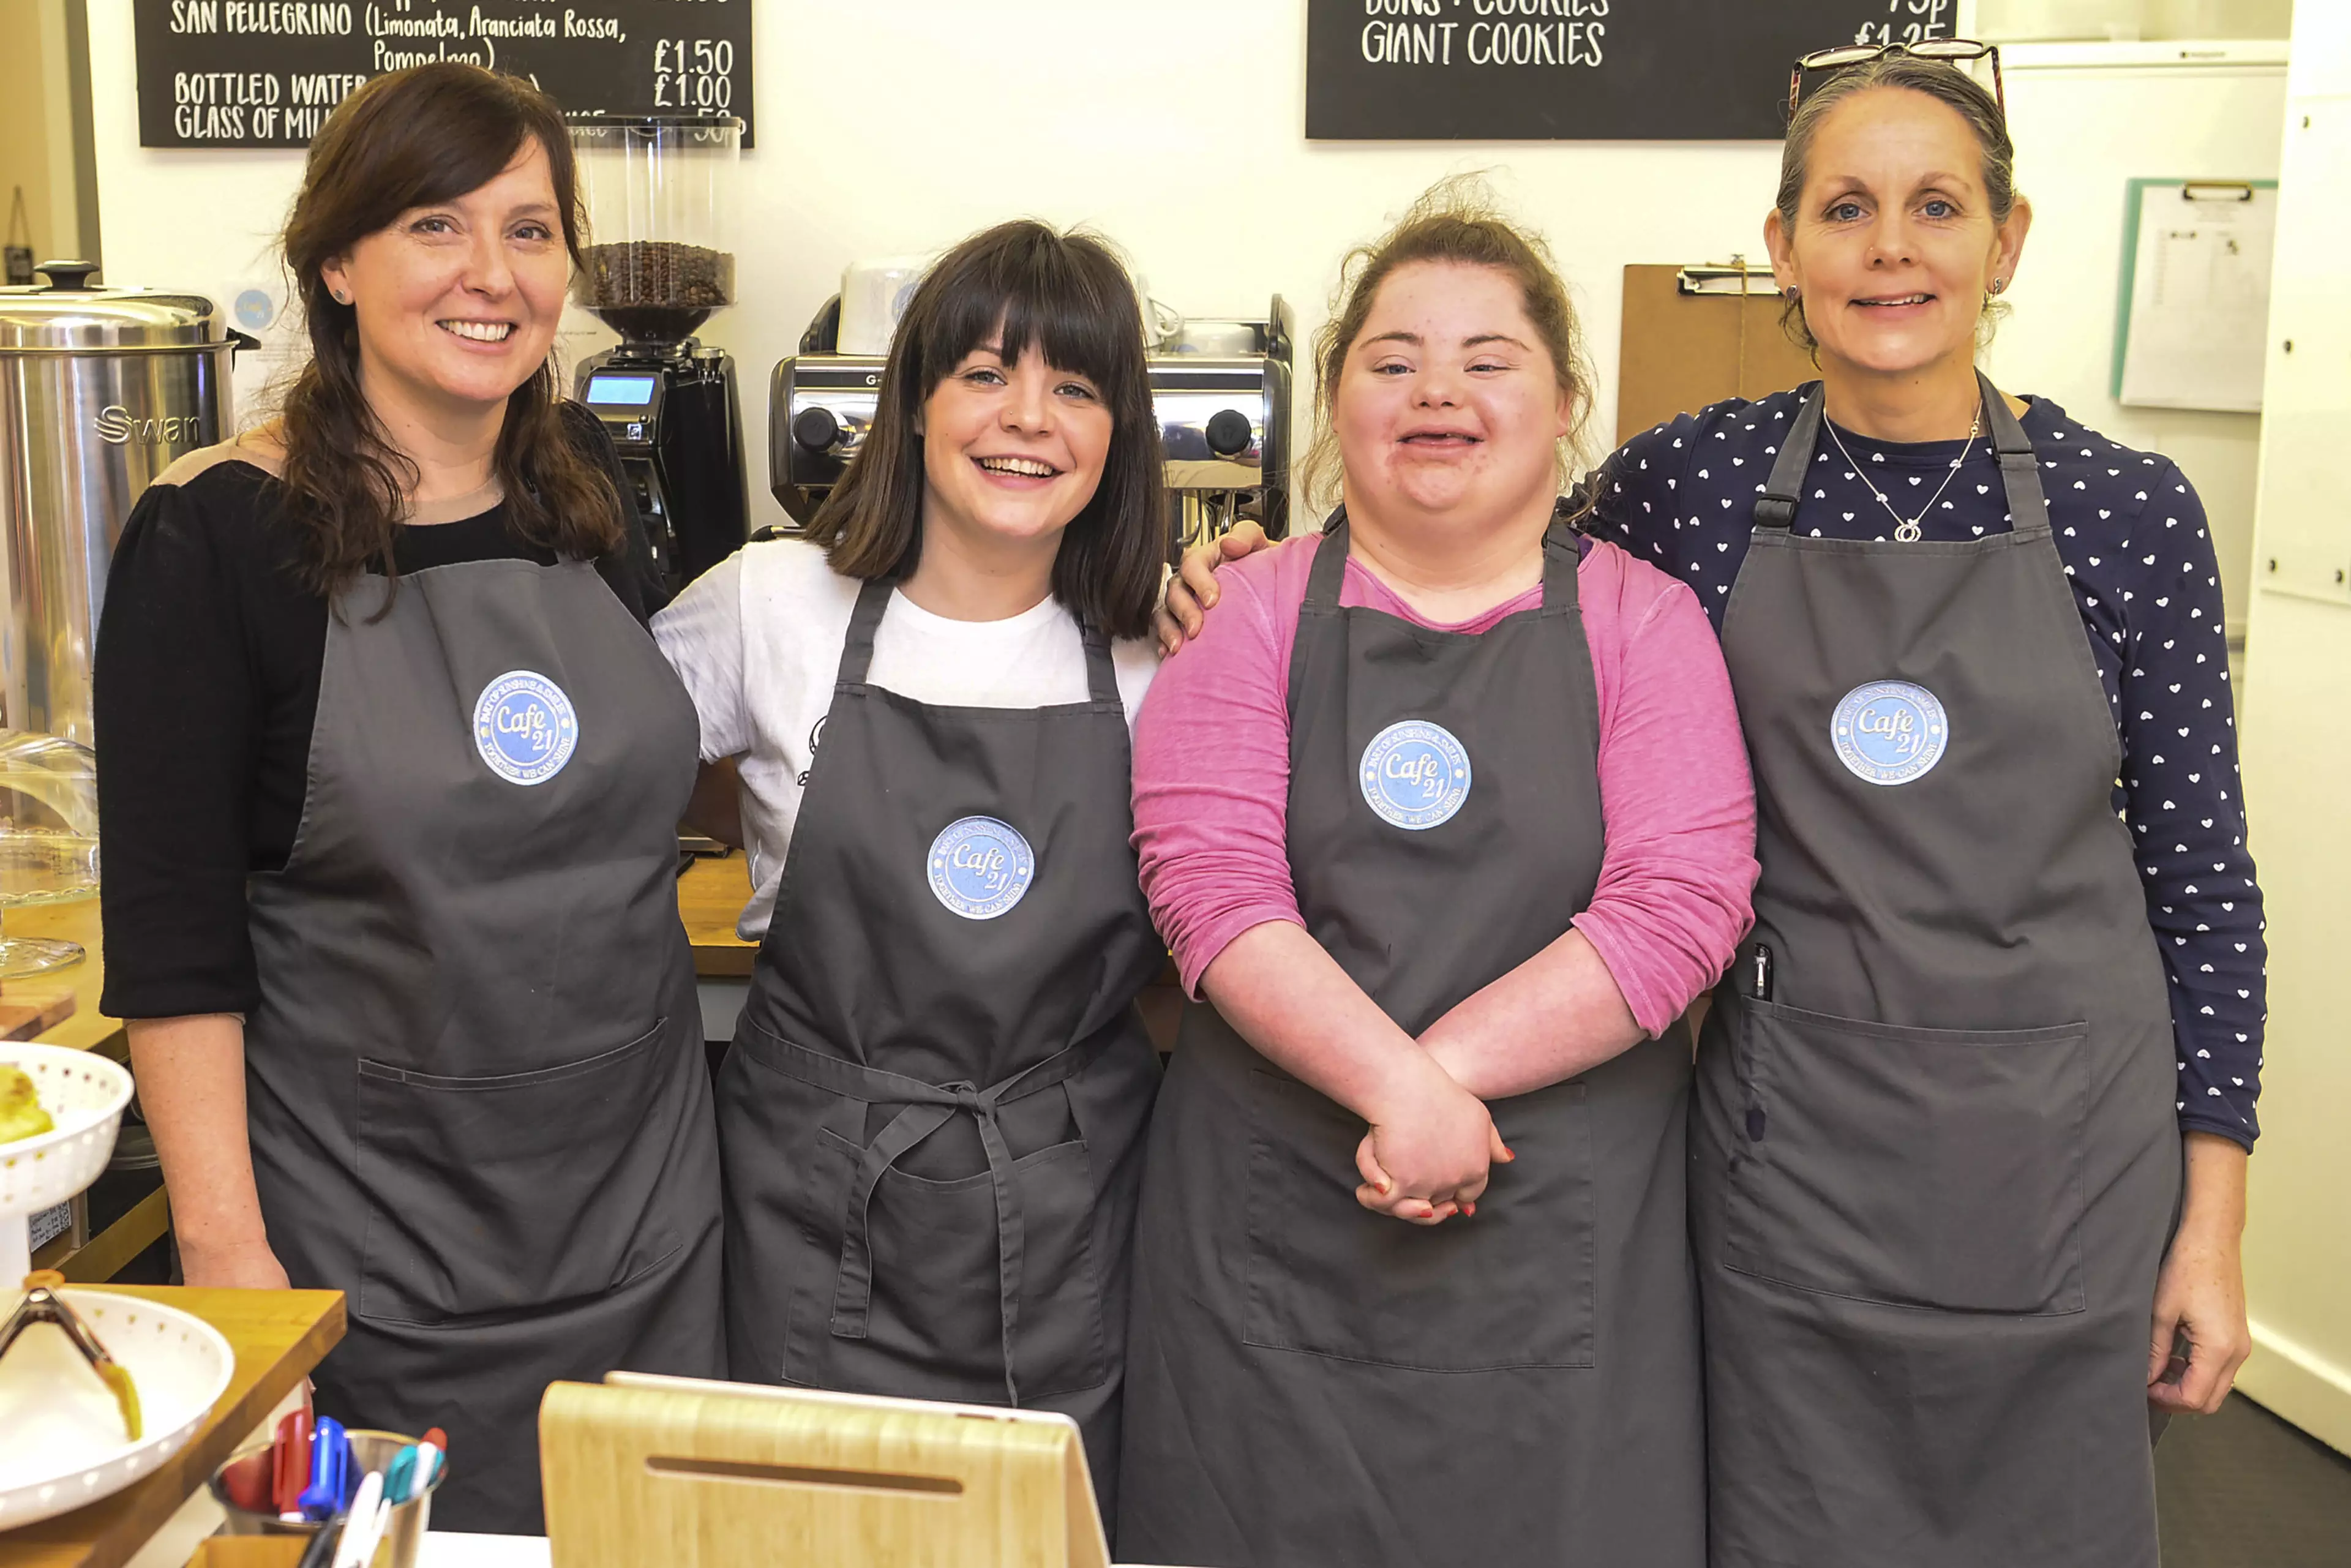 The cafe is hoping to provide people with Down Syndrome with work experience. (